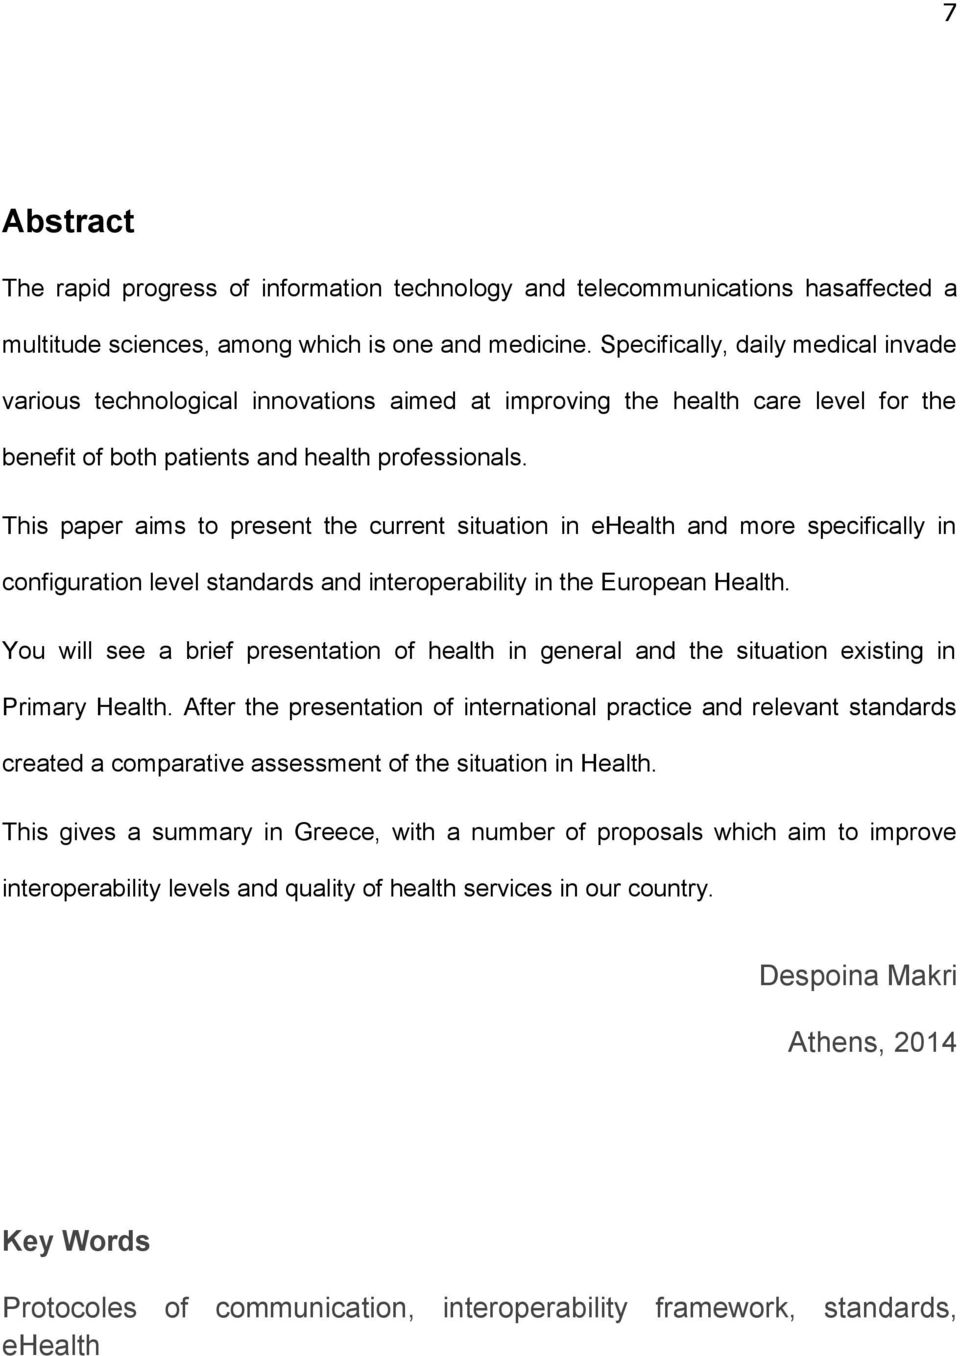 This paper aims to present the current situation in ehealth and more specifically in configuration level standards and interoperability in the European Health.